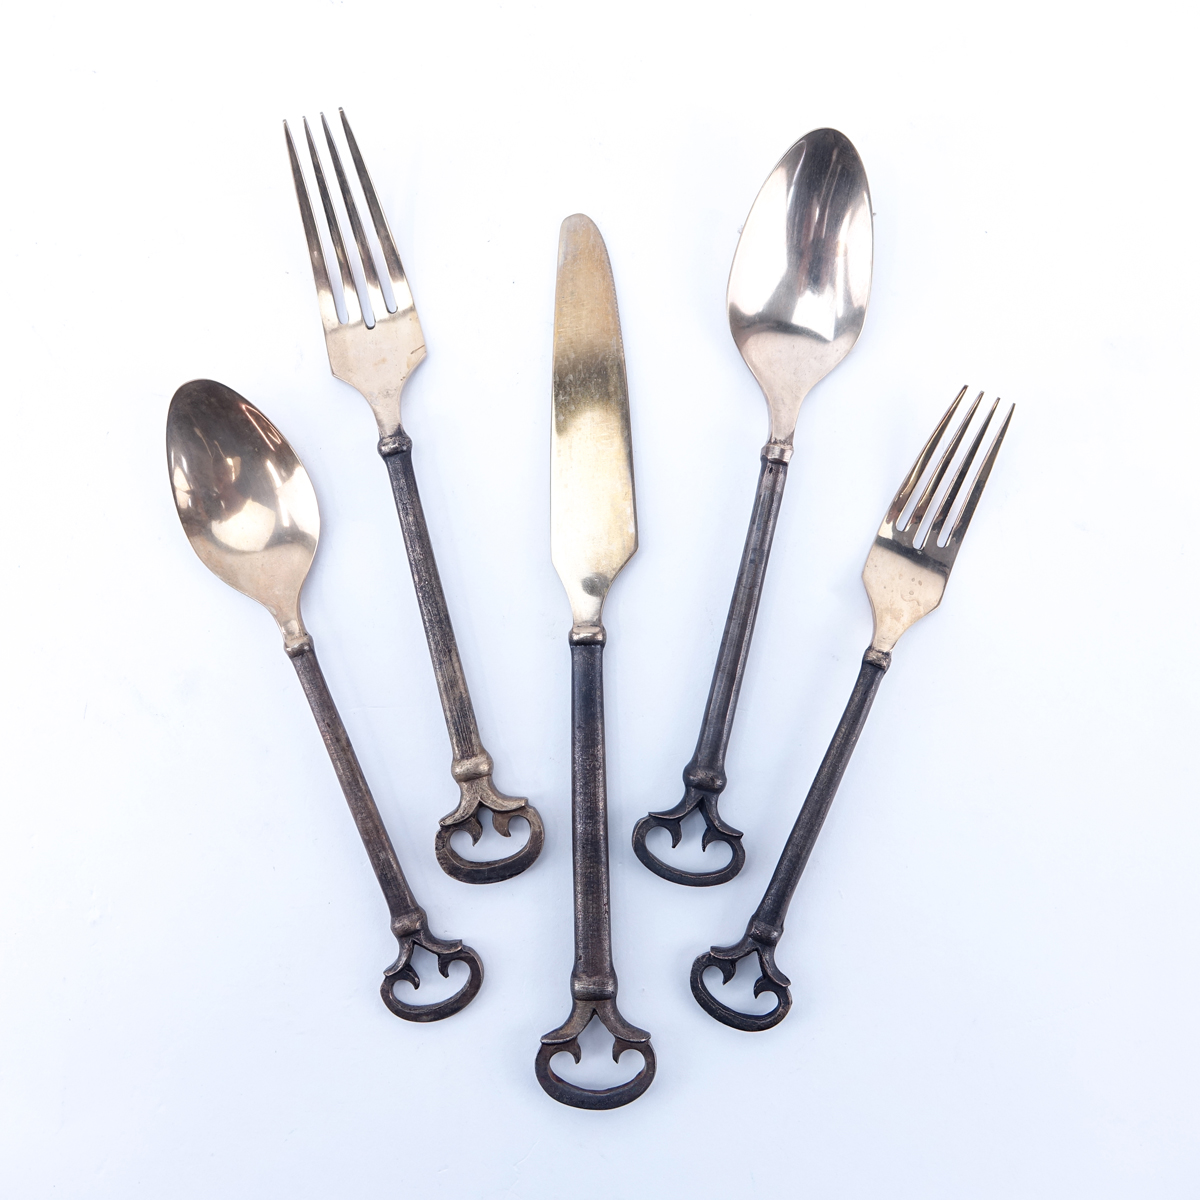 Forty (40) Piece Set Antique Solid Brass Flatware. Includes 8 each: forks 8-1/8", knives 9-1/2", salad forks, place spoons, teaspoons.